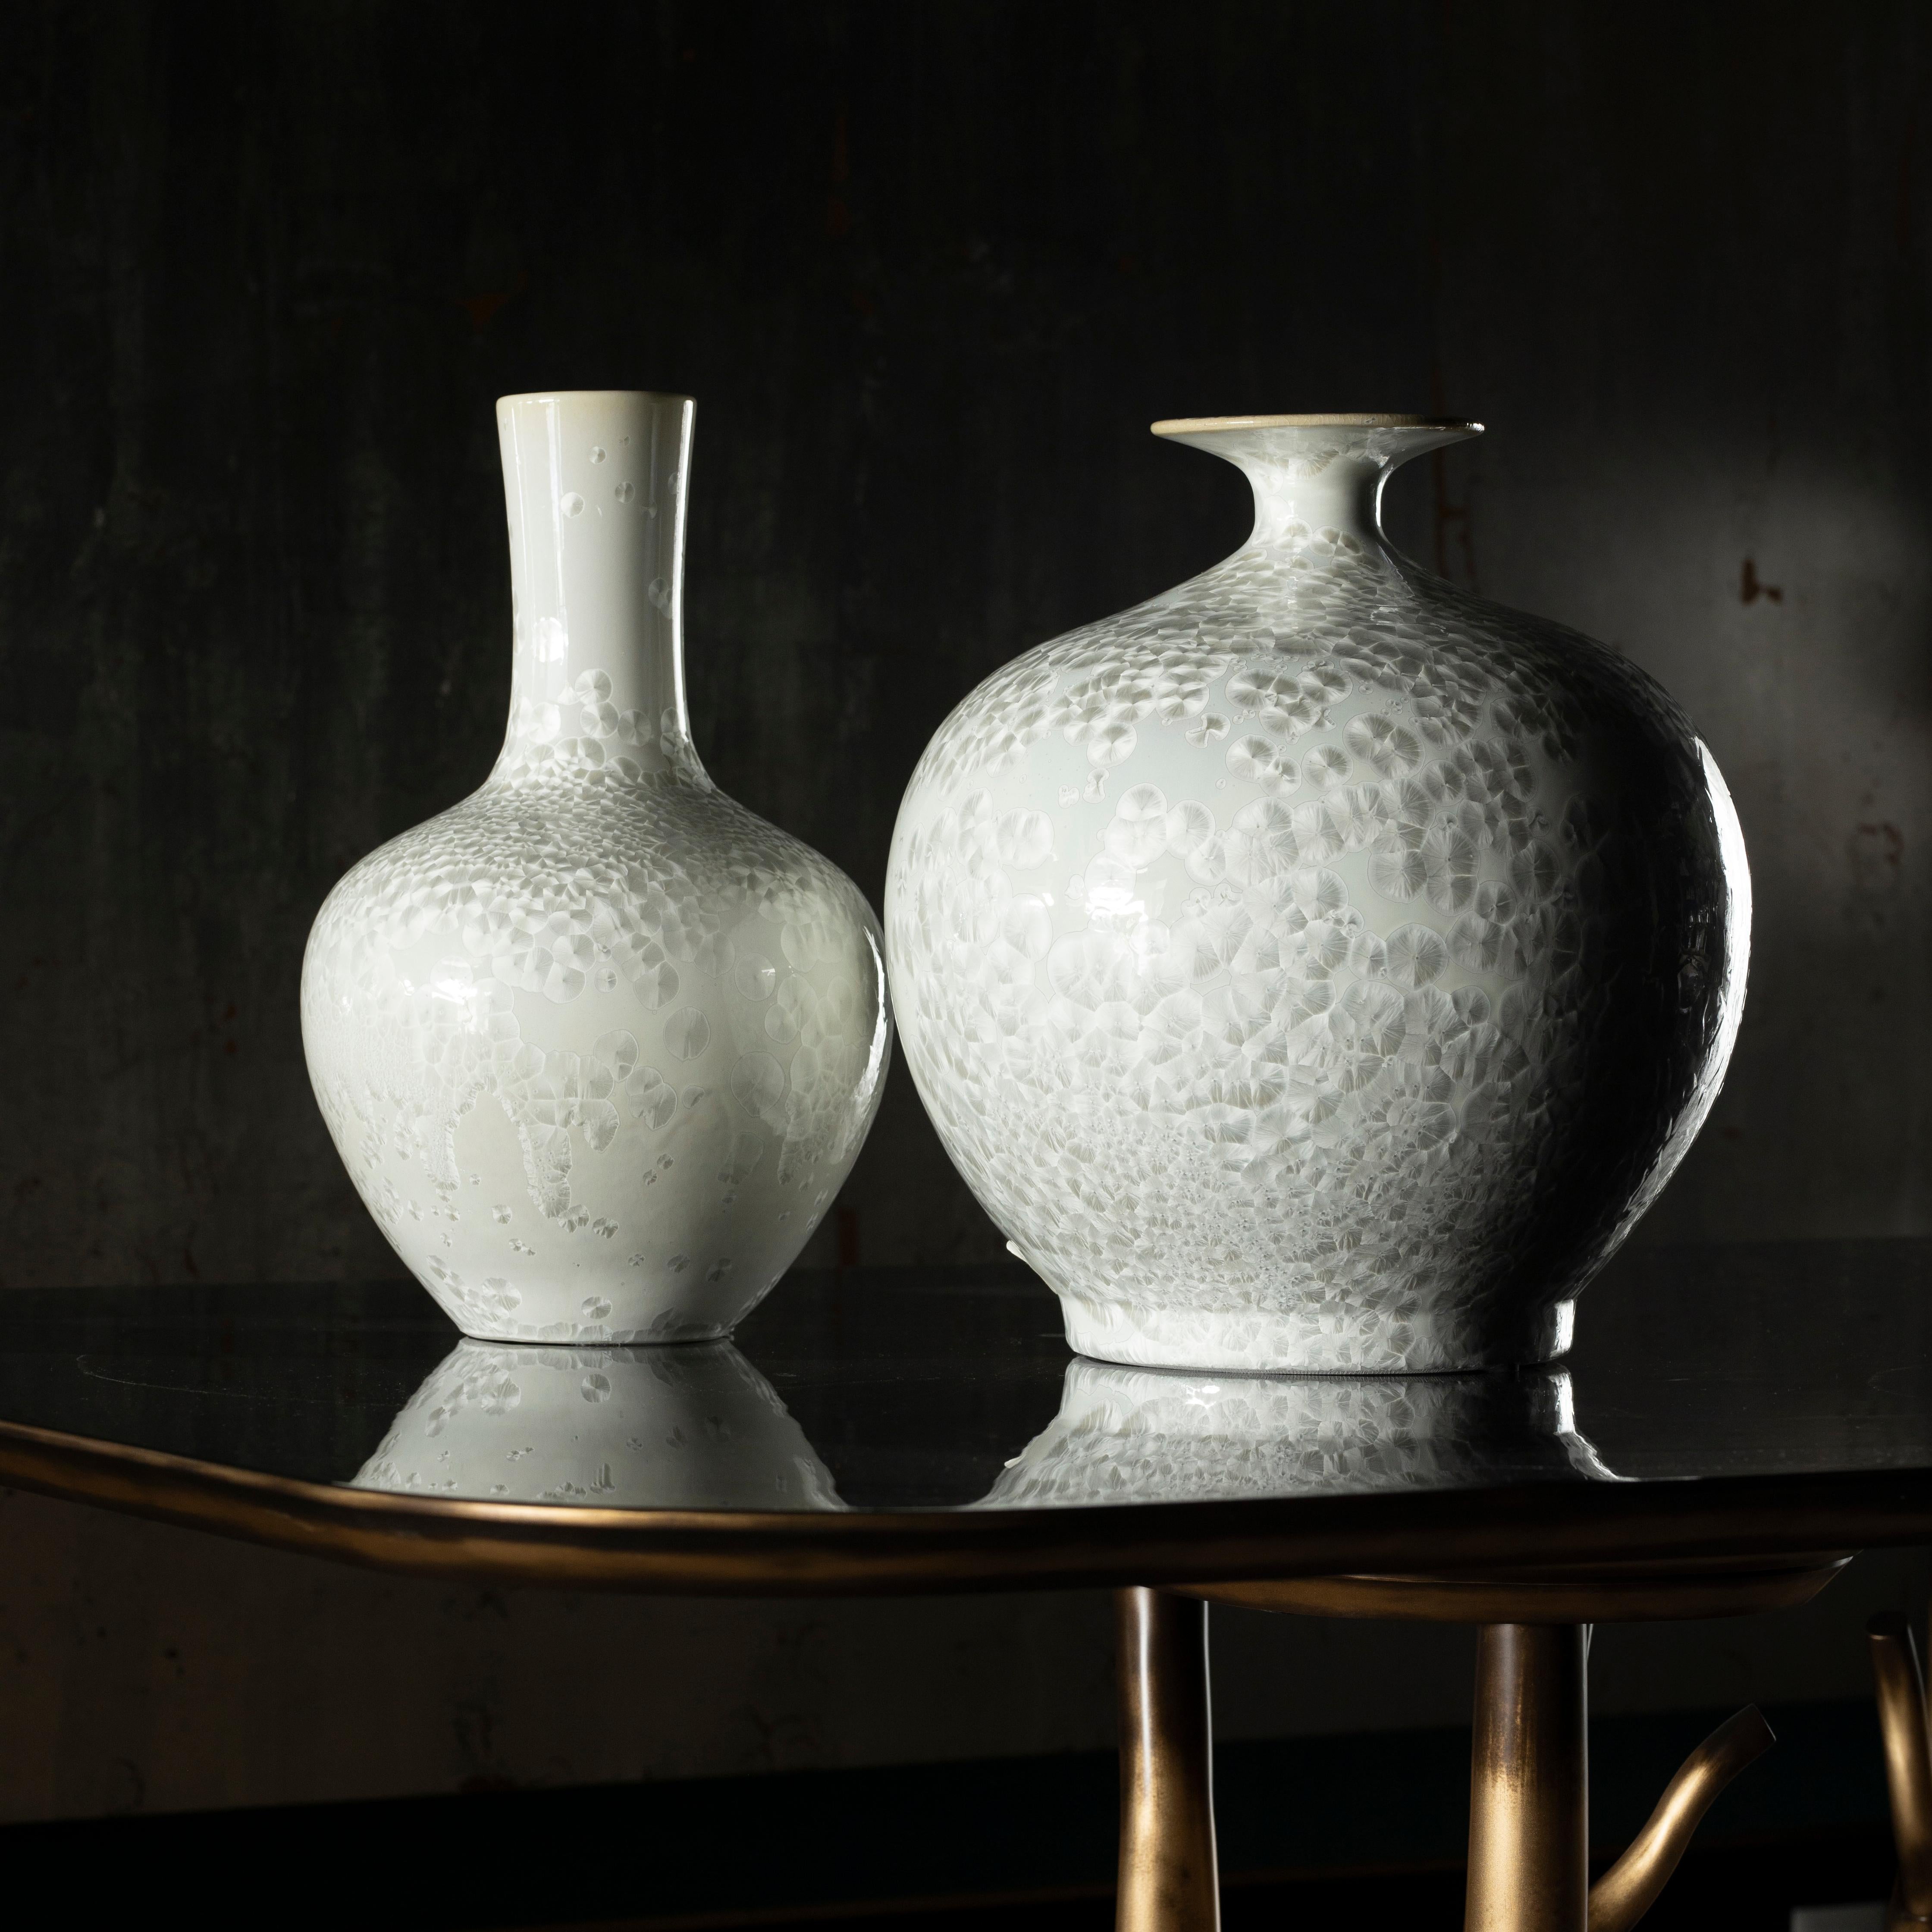 Set/2 Tang Porcelain Vases, Lusitanus Home Collection by Lusitanus Home.

Real chinese porcelain vase produced by hand with traditional methods. Waterproof. The nacre finish makes each piece unique. The longtime relationship between Portugal and